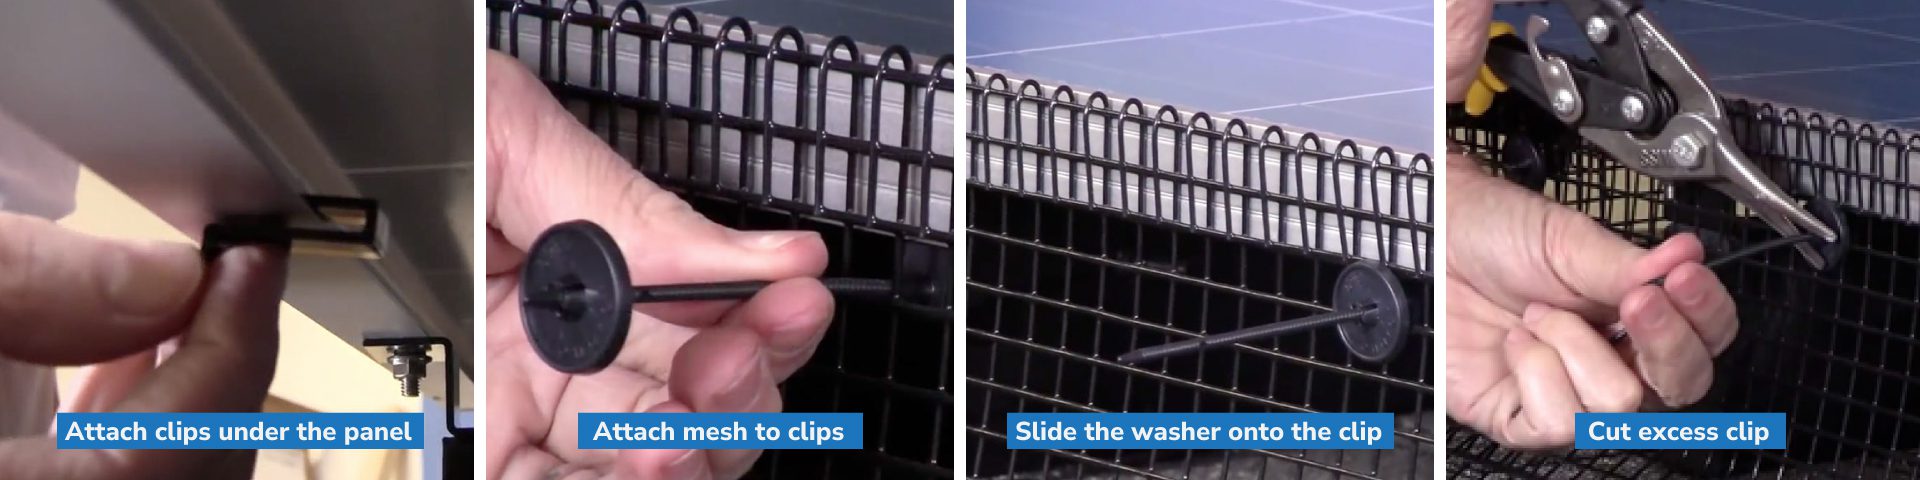 Instructions on How to Install Solar Panel Mesh